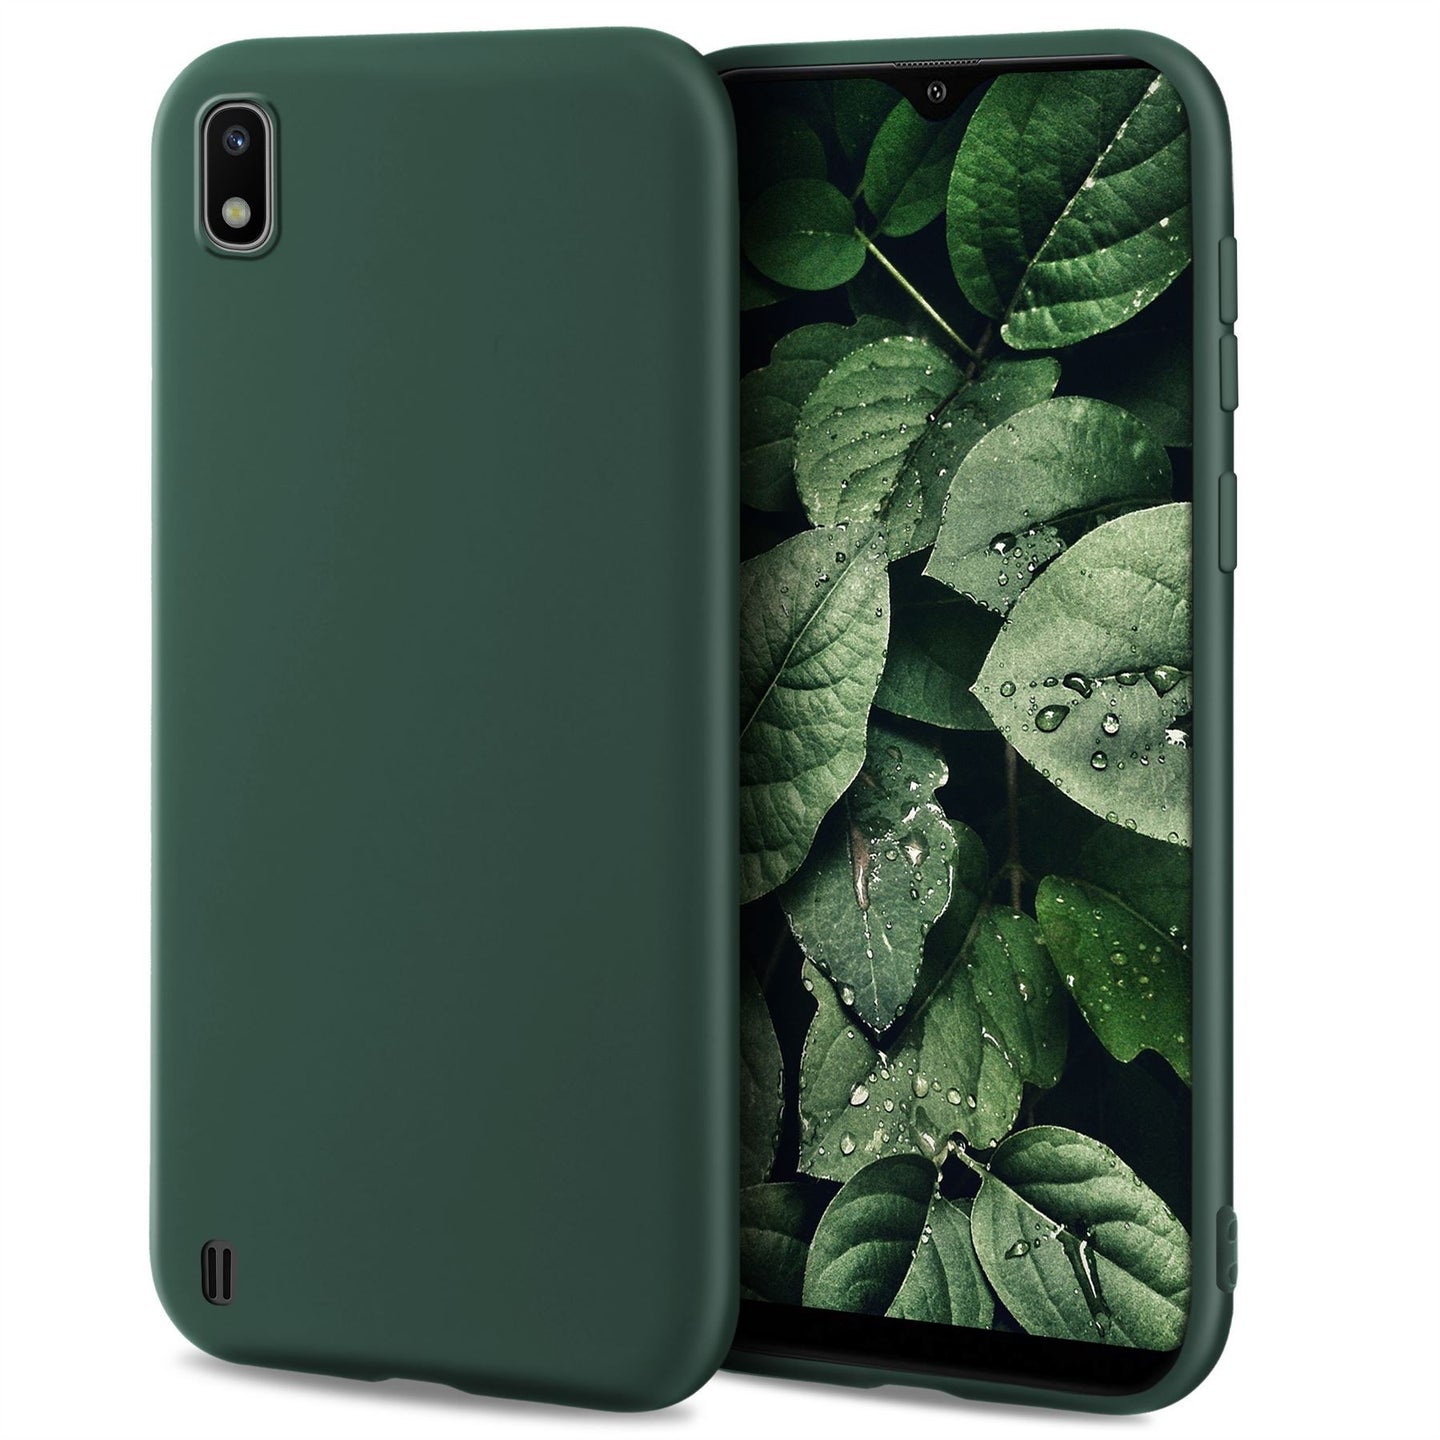 Moozy Minimalist Series Silicone Case for Samsung A10, Midnight Green - Matte Finish Slim Soft TPU Cover